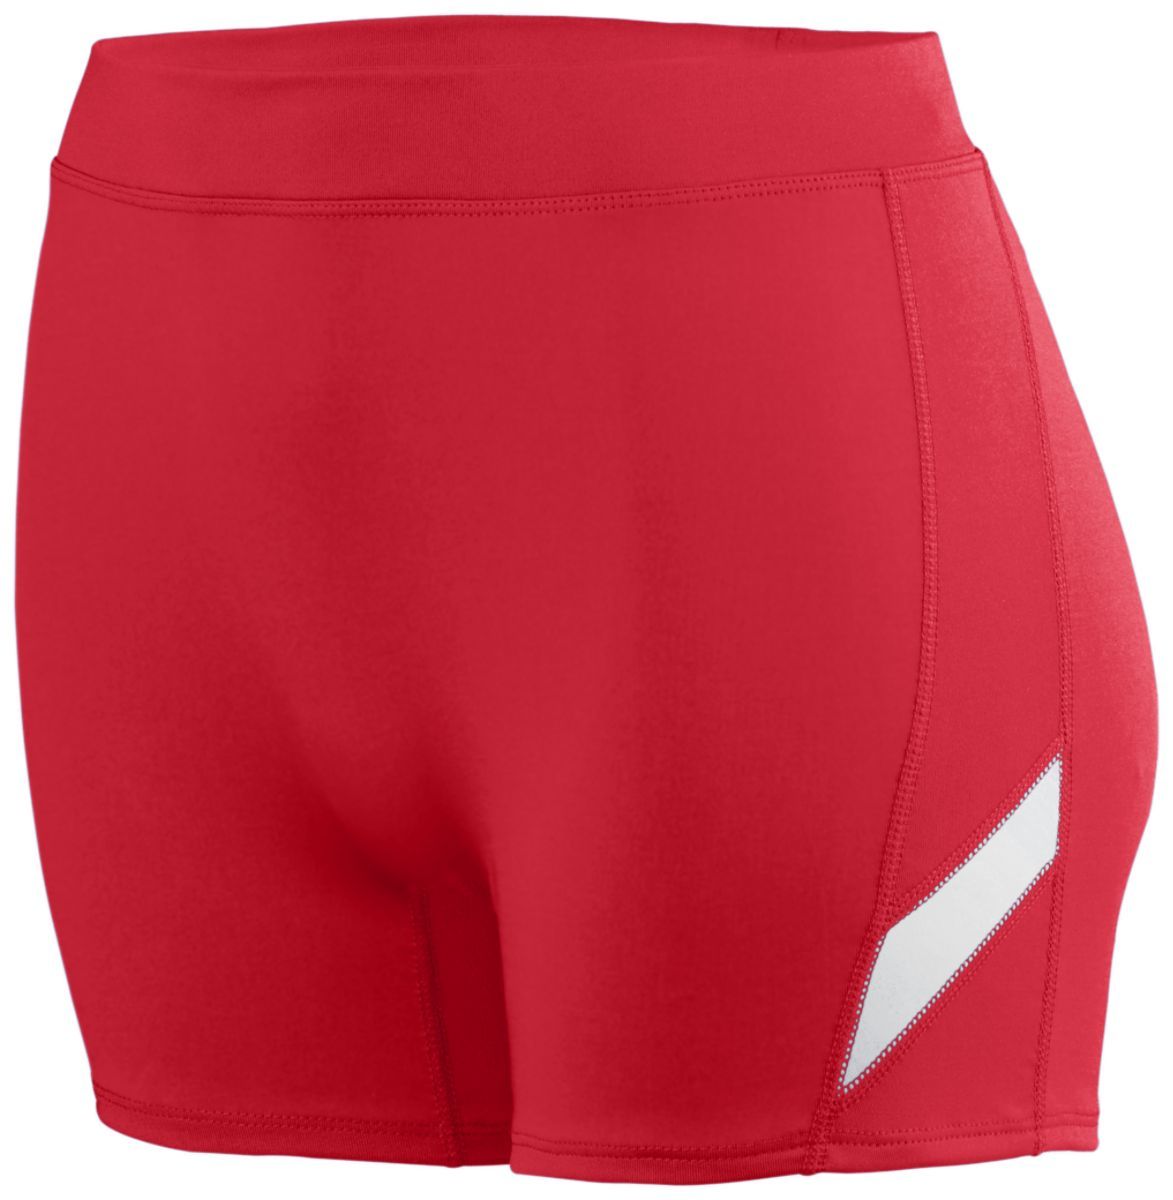 Augusta Sportswear Girls Stride Shorts in Red/White  -Part of the Girls, Augusta-Products, Volleyball, Girls-Shorts product lines at KanaleyCreations.com